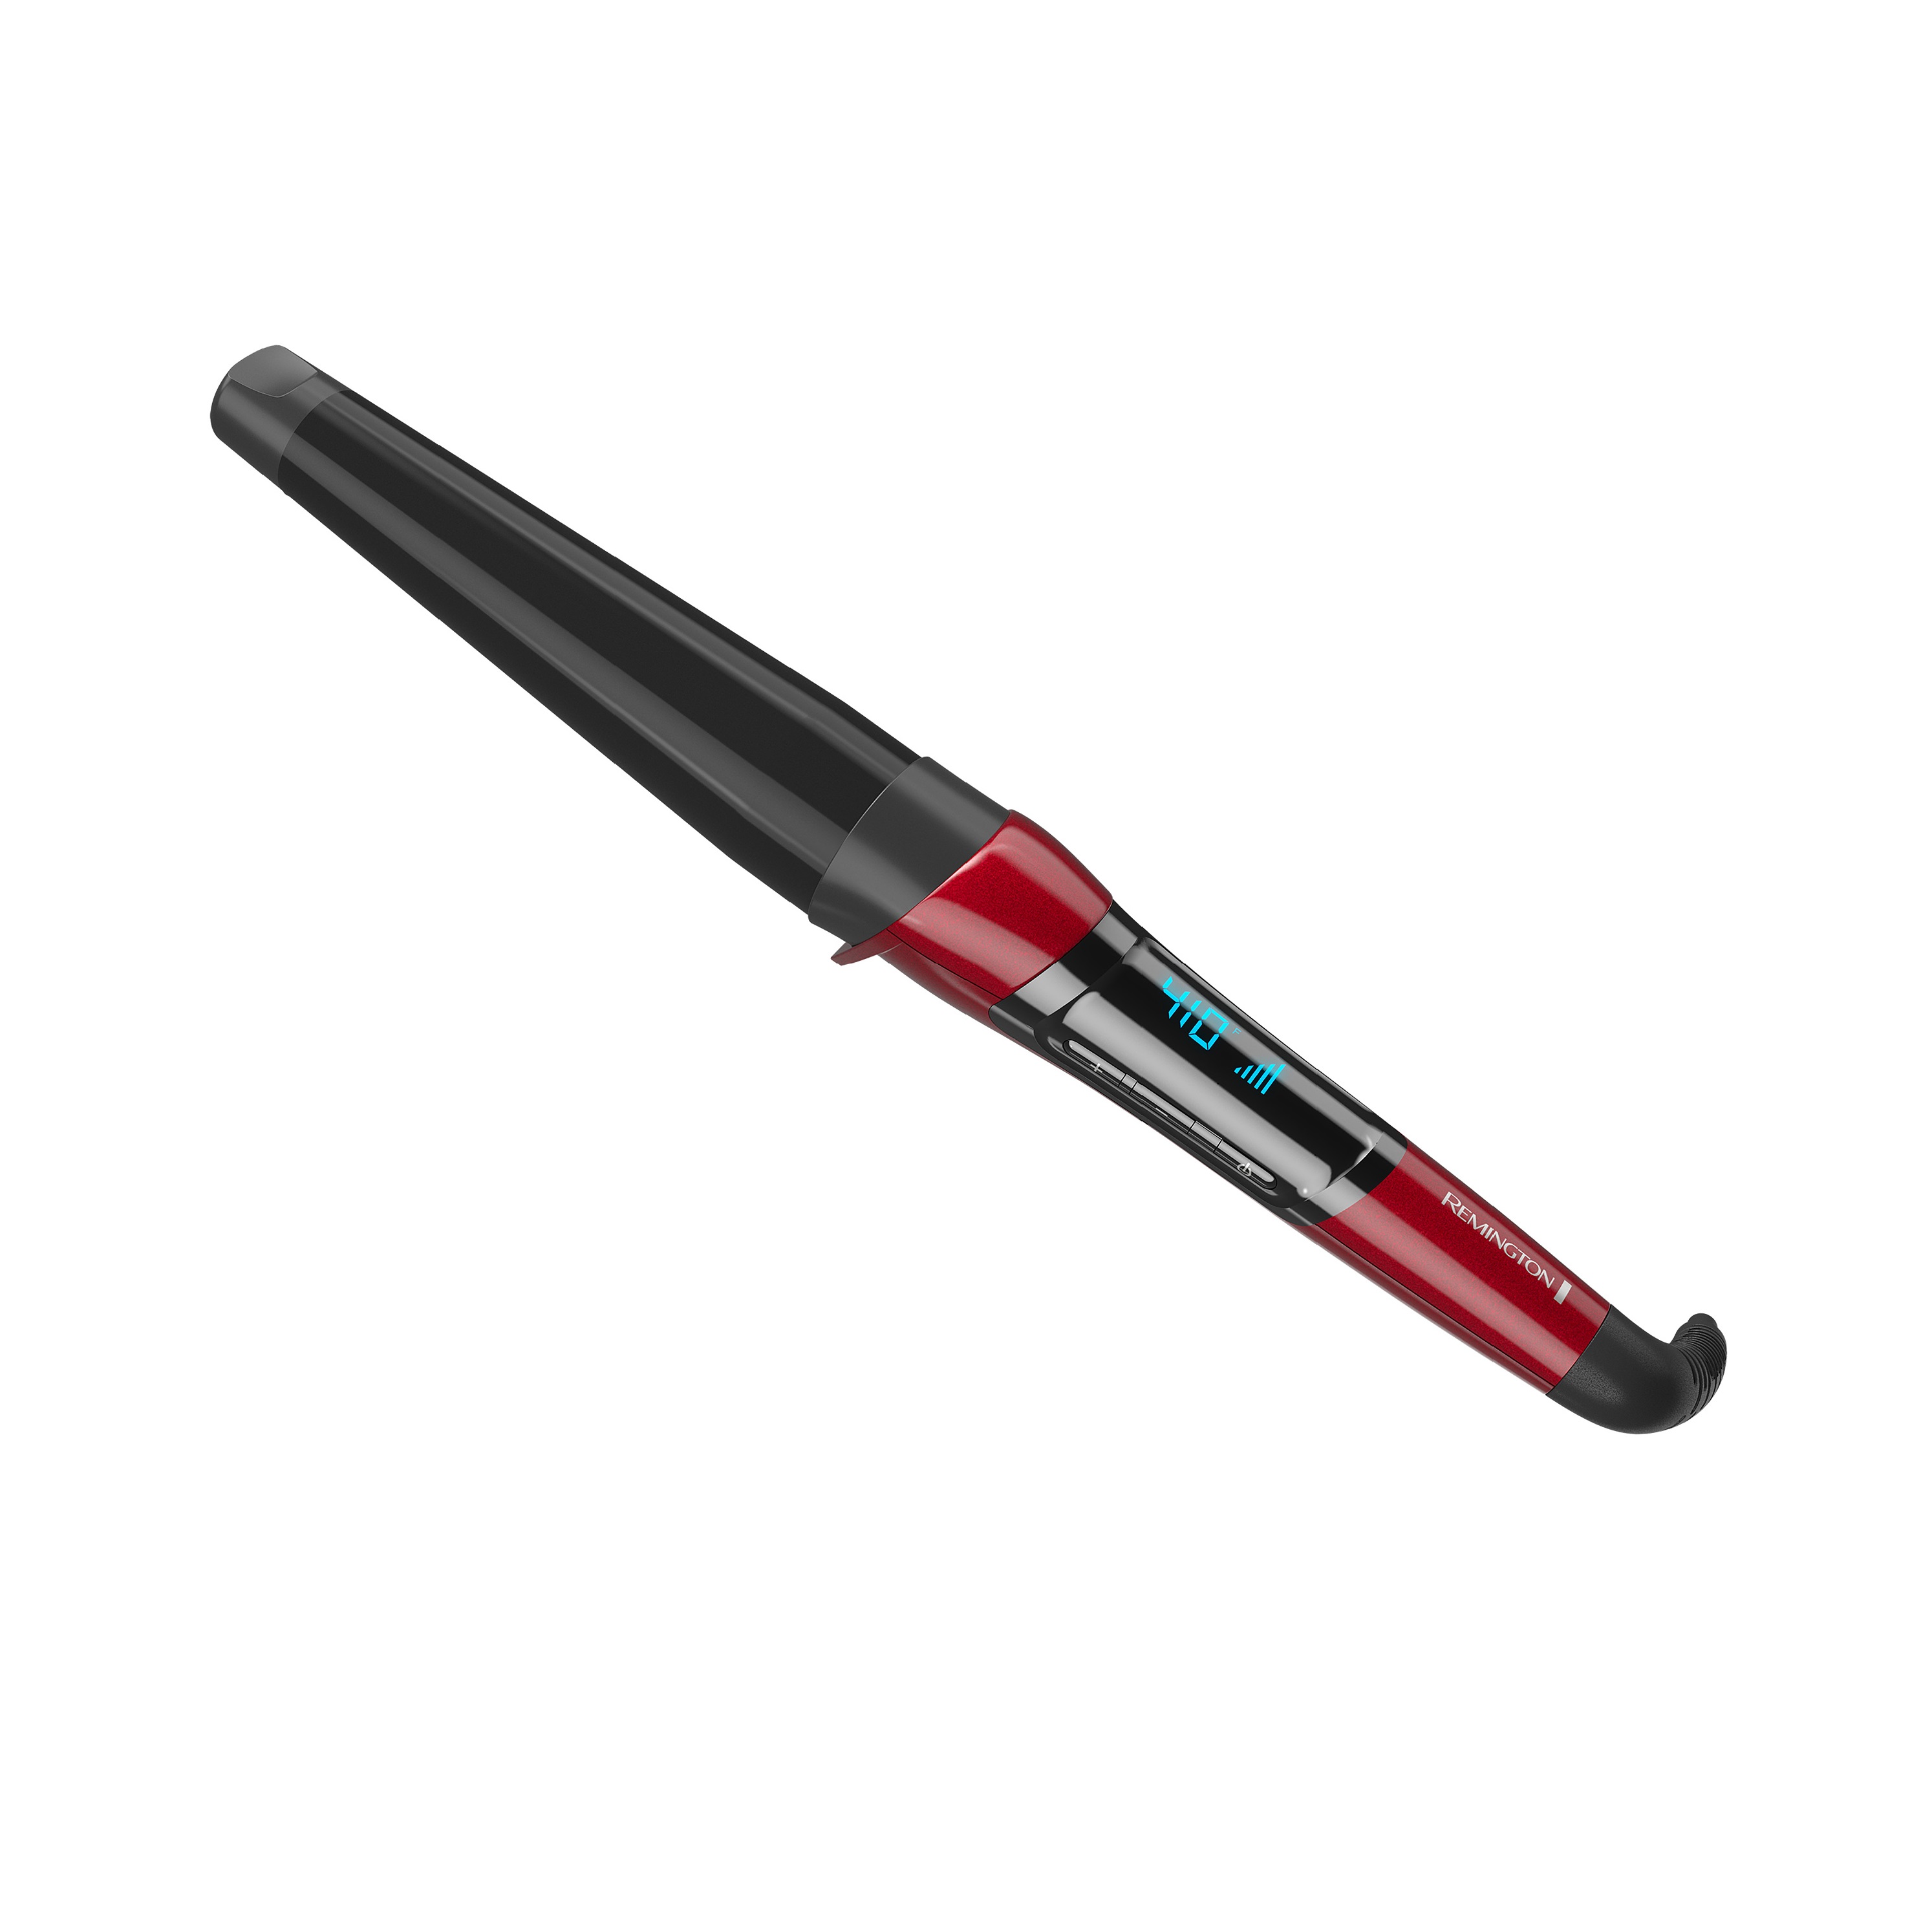 Remington Pro 1-1 Curling Wand With Silk Ceramic Advanced Technology, Red Ci96X7B - image 1 of 13